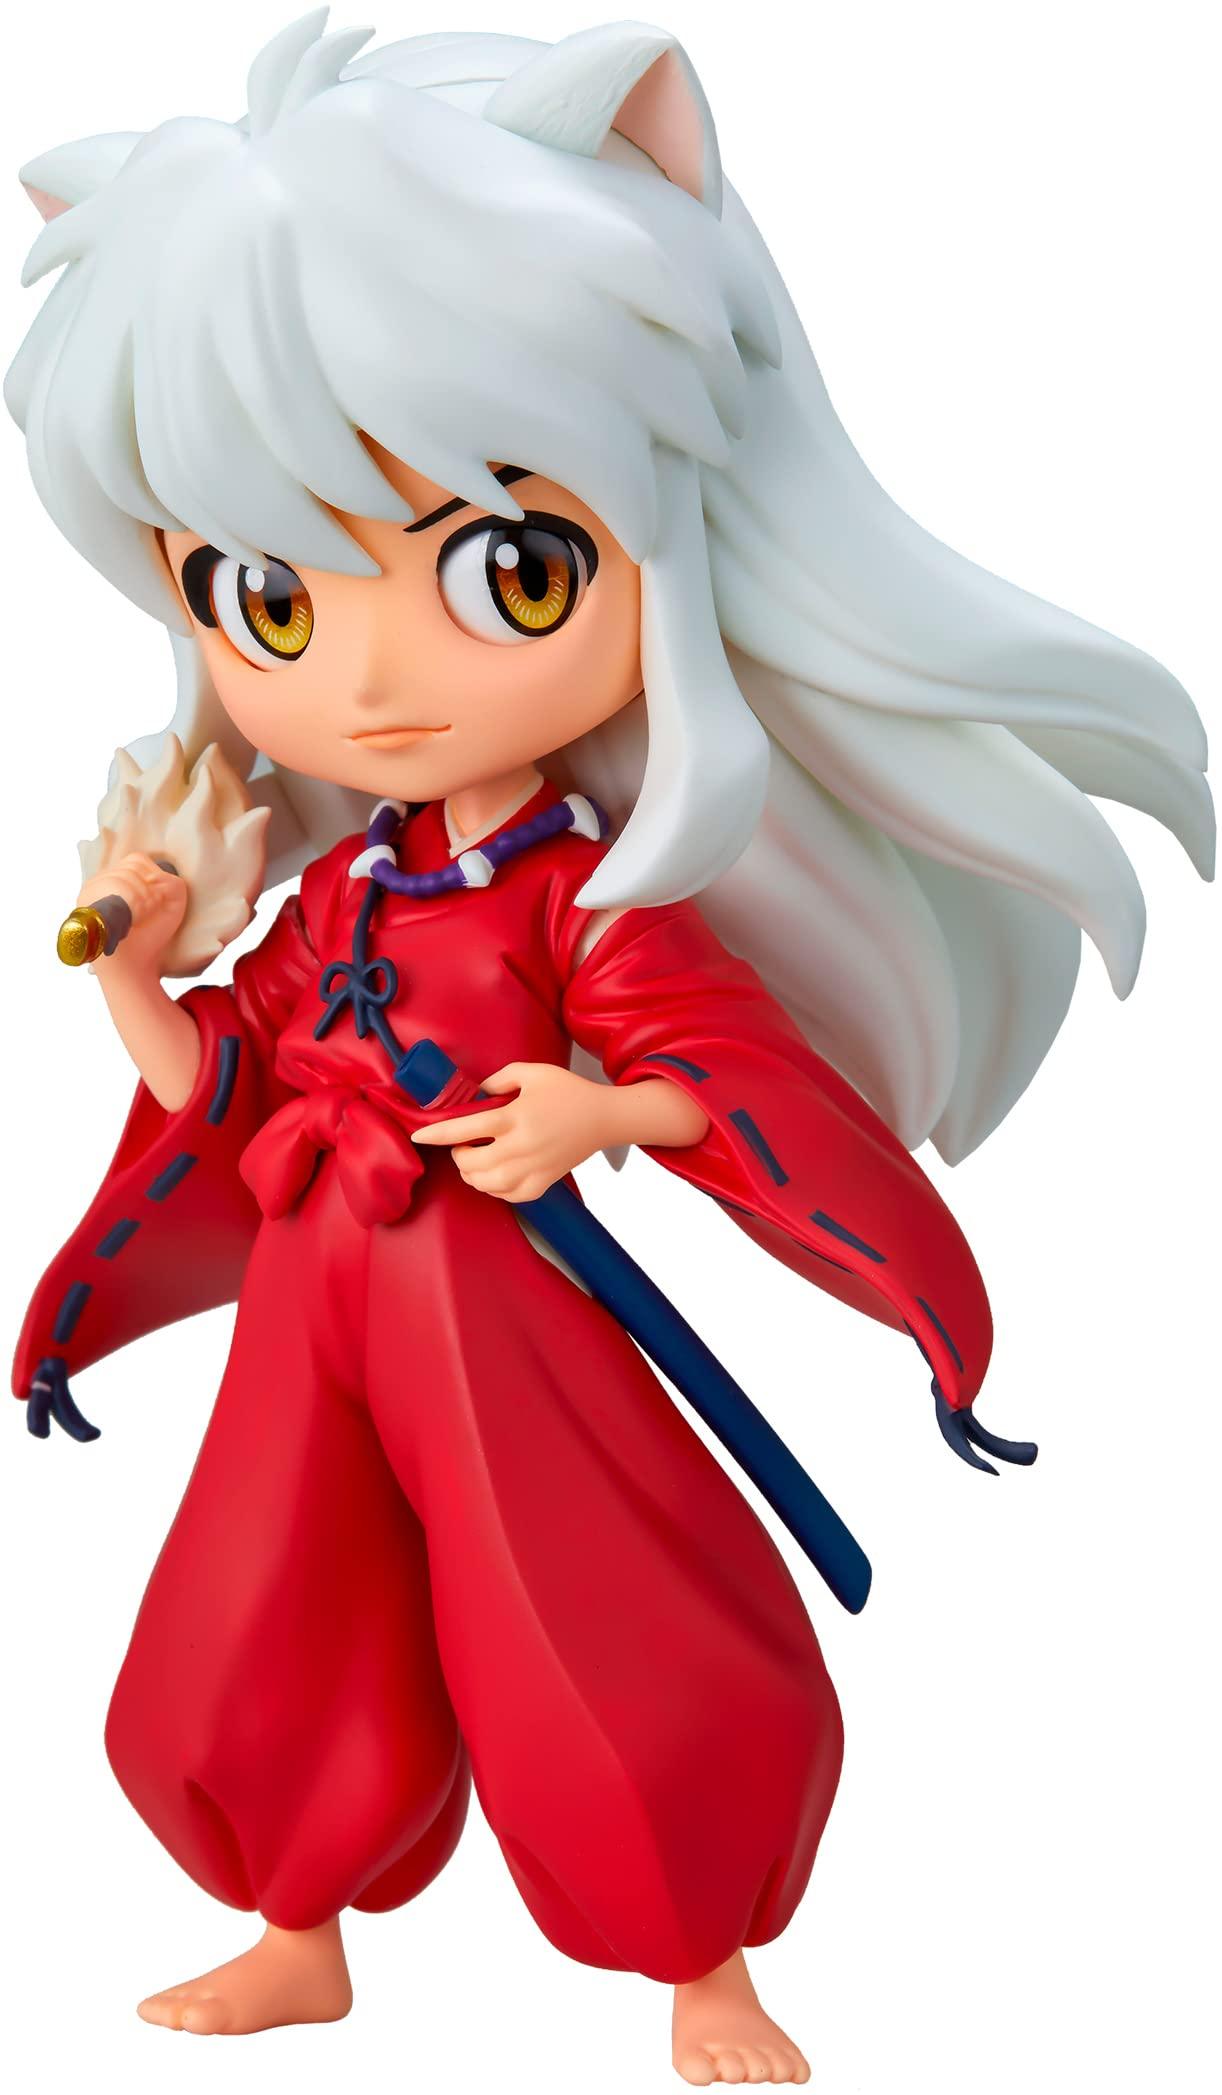 Action Figure - QPosket Inuyasha vers. A special color 14 cm - INUYASHA - Magic Dreams Store